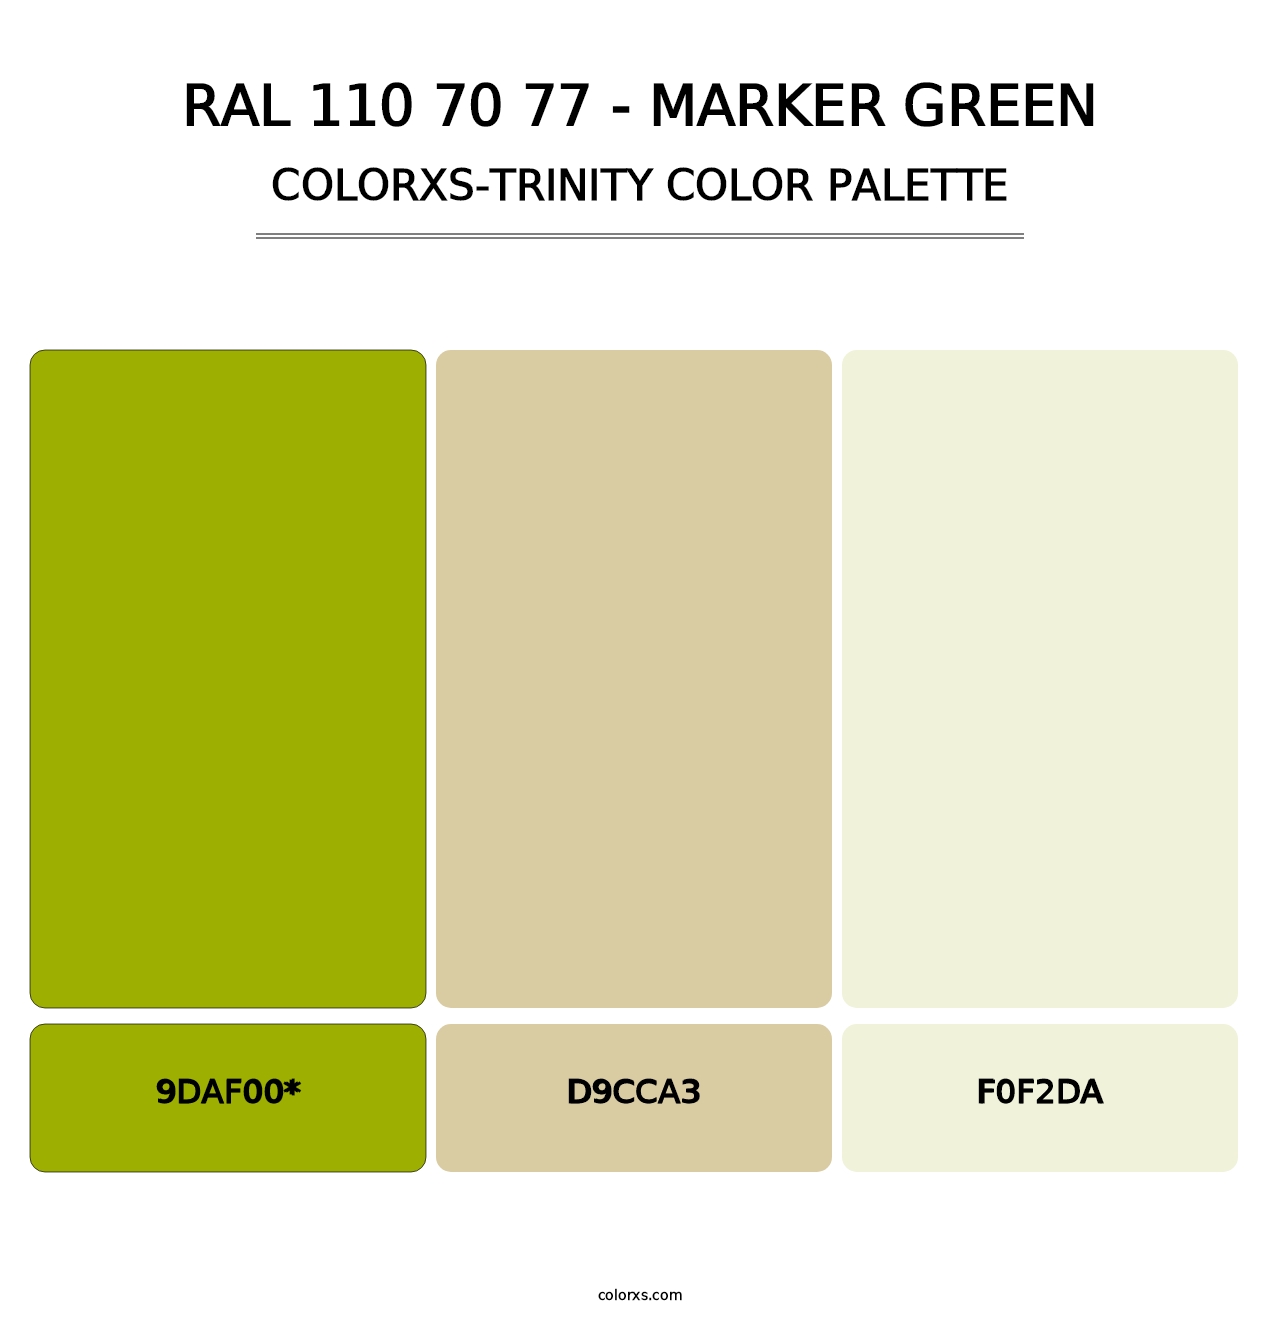 RAL 110 70 77 - Marker Green - Colorxs Trinity Palette